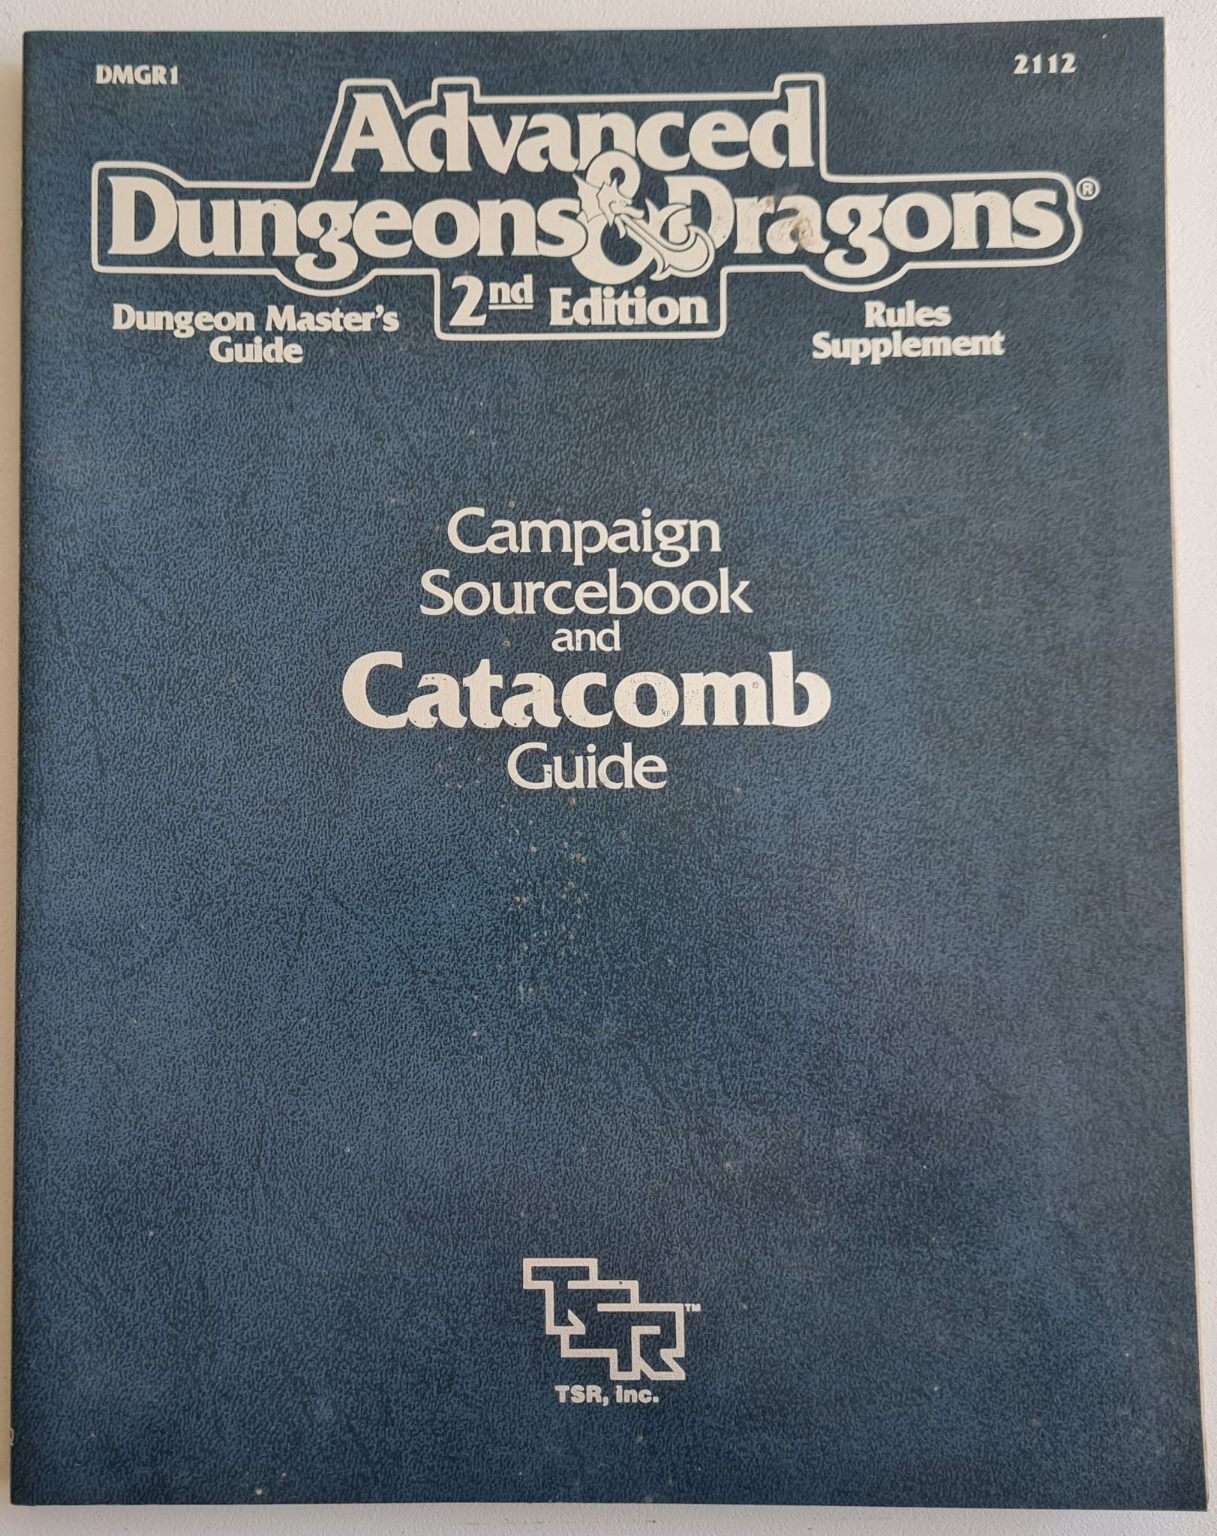 Advanced Dungeons and Dragons - Campaign Sourcebook and Catacomb Guide (2112) Default Title